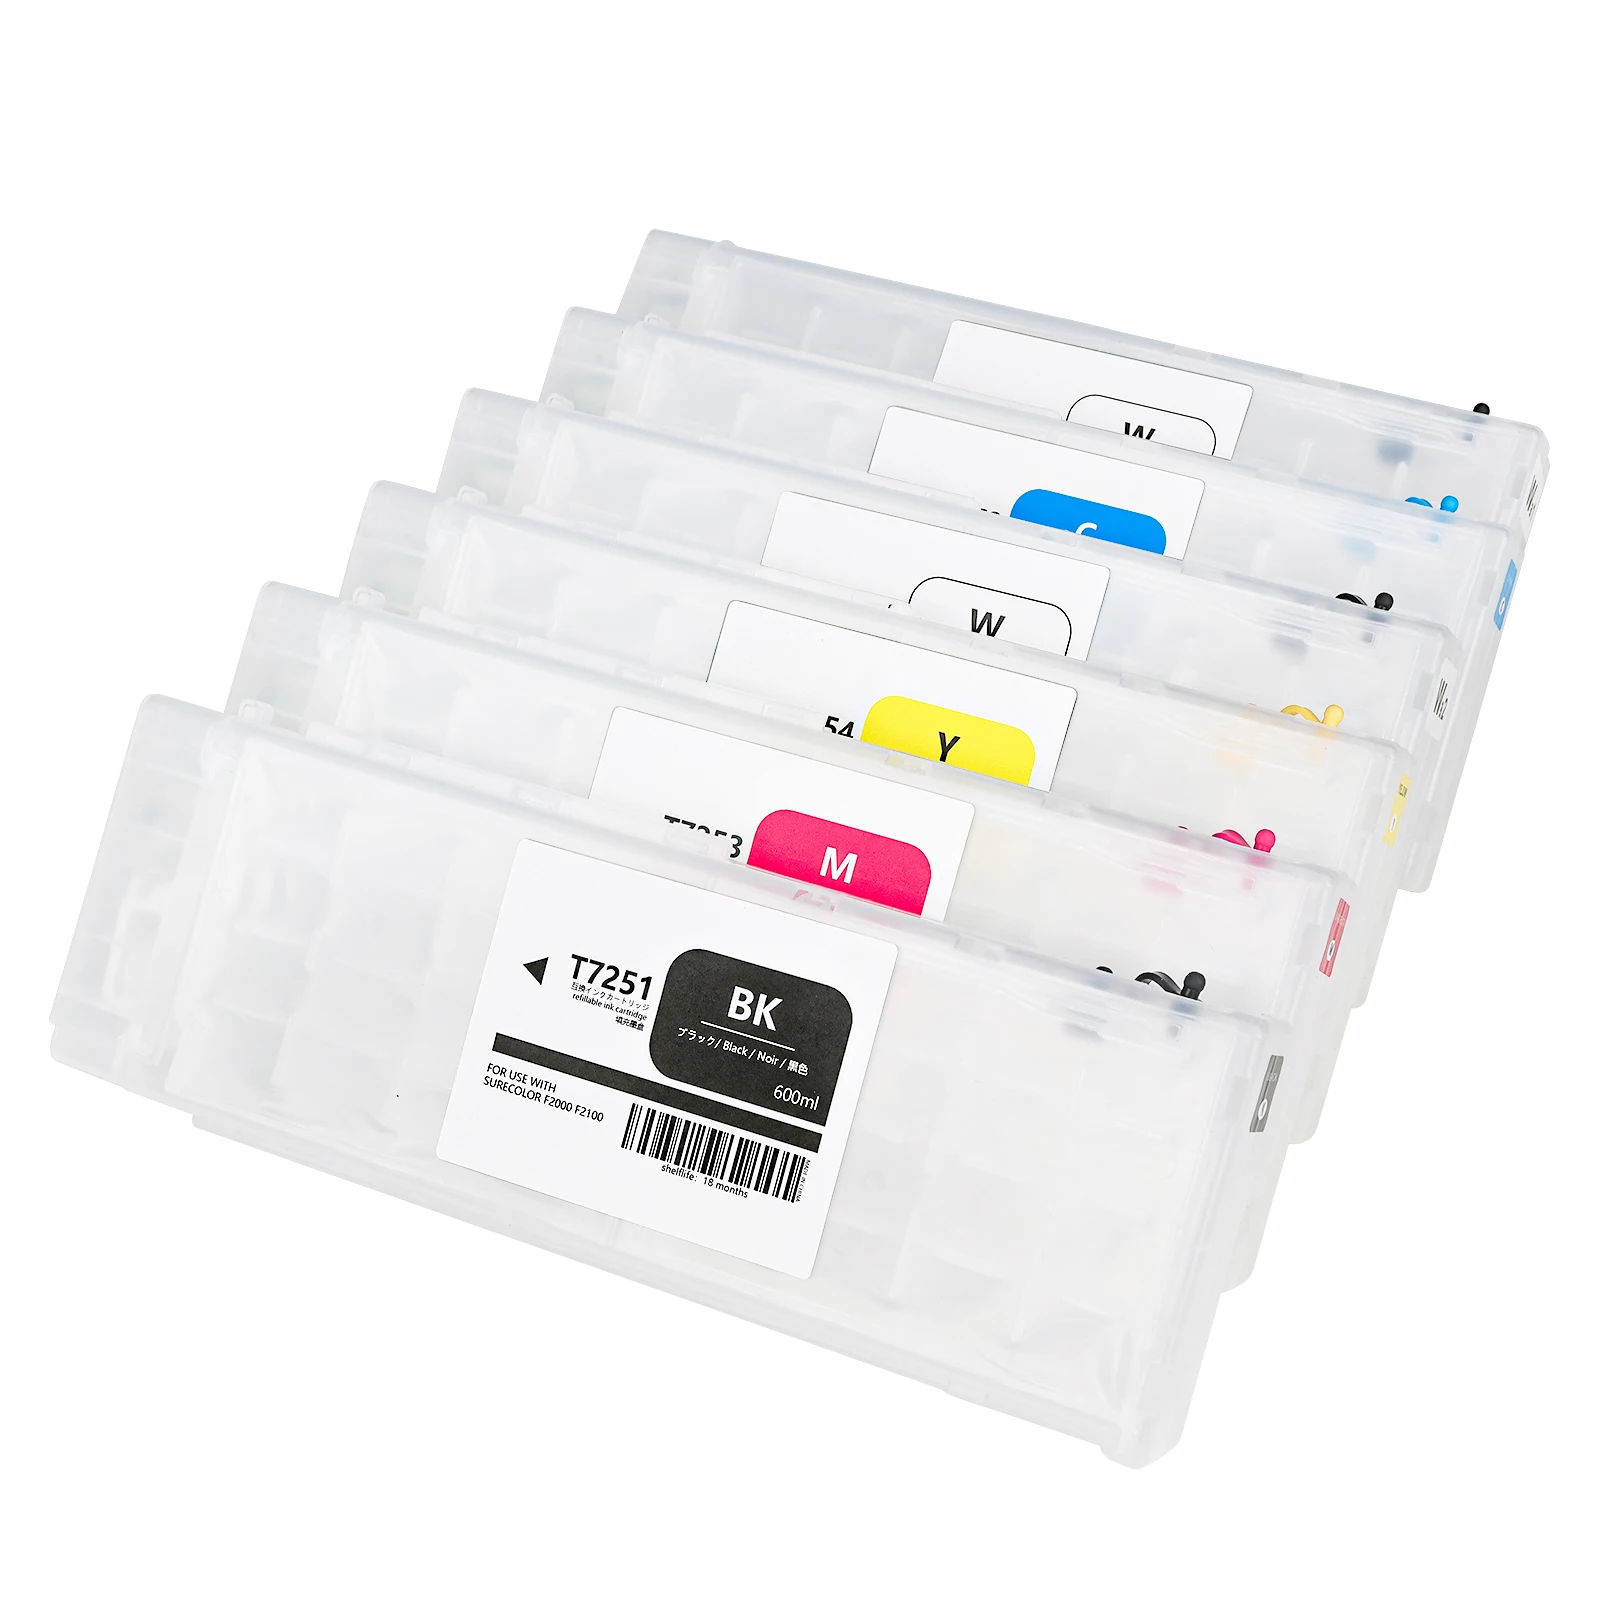 

Stable 600ml Empty Refillable ink cartridge for Epson F2000 F2100 Printer T7251-T7254 T725A T725A